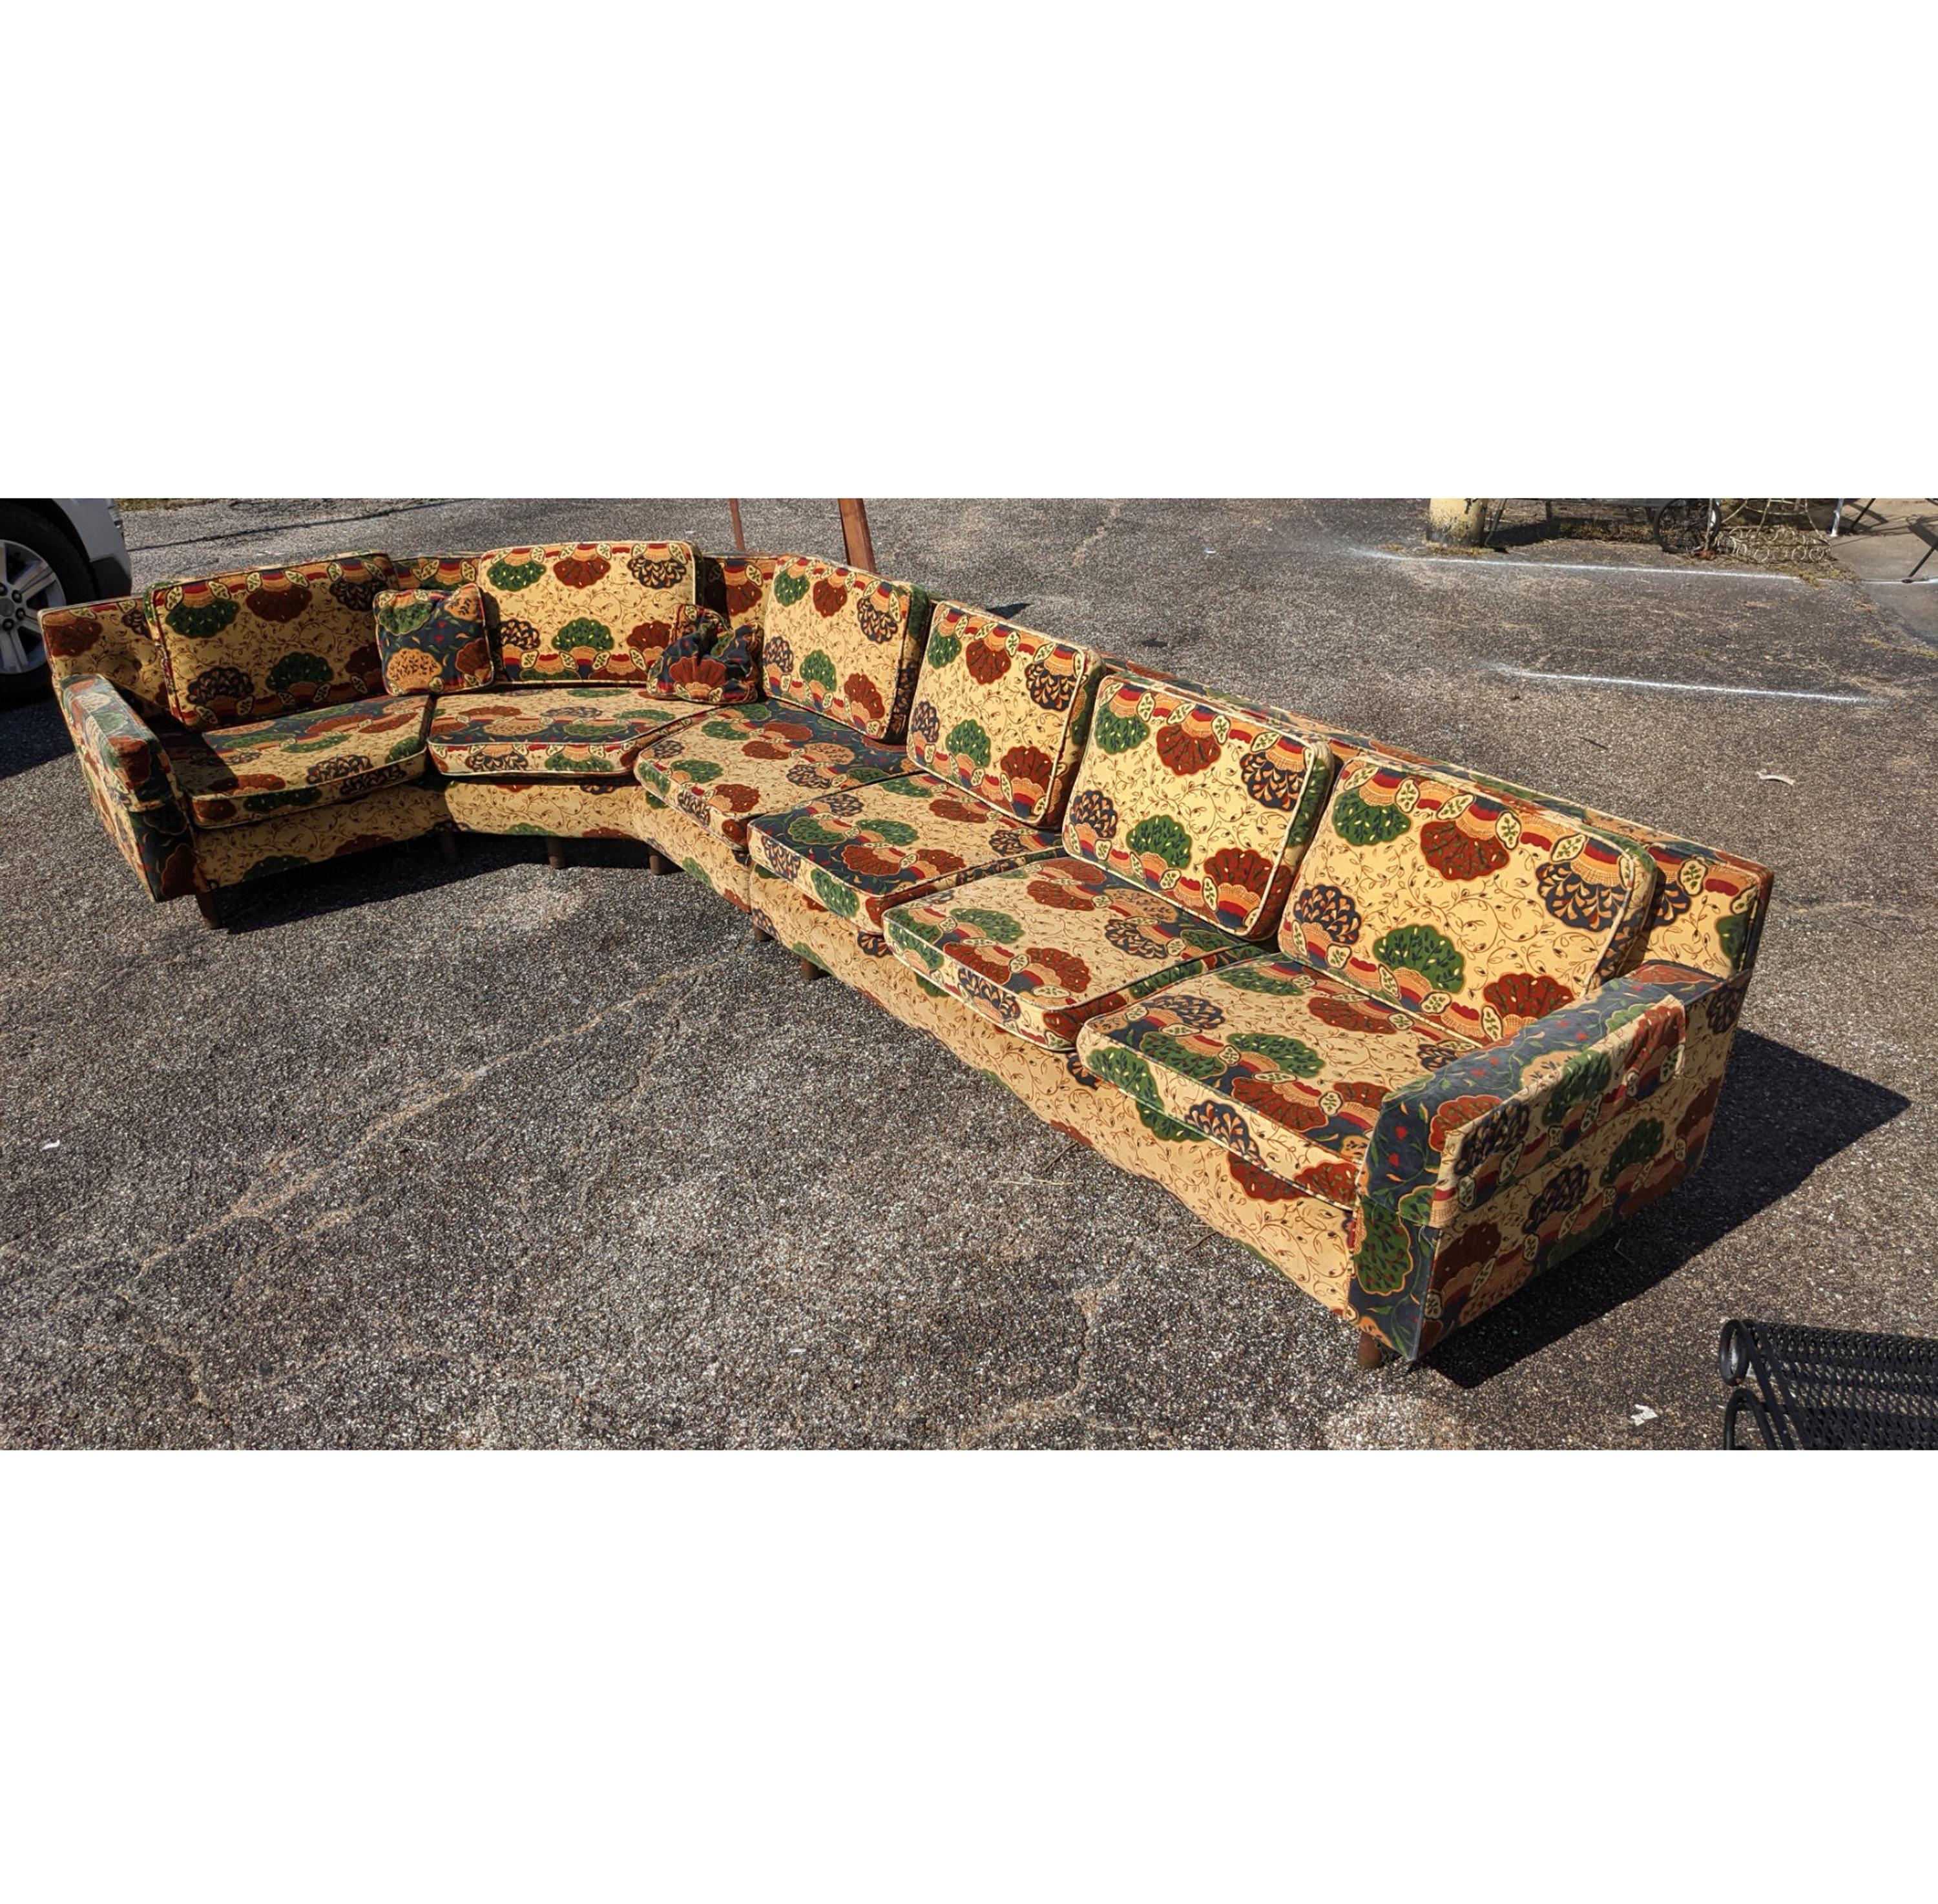 Dunbar Wormley 2 piece sectional sofa
1950s


Rare sectional sofa designed by Edward Wormley, manufactured by Dunbar. The sofa consists of two parts of one angled and one straight. Pieces can be used together or separately. Walnut base with